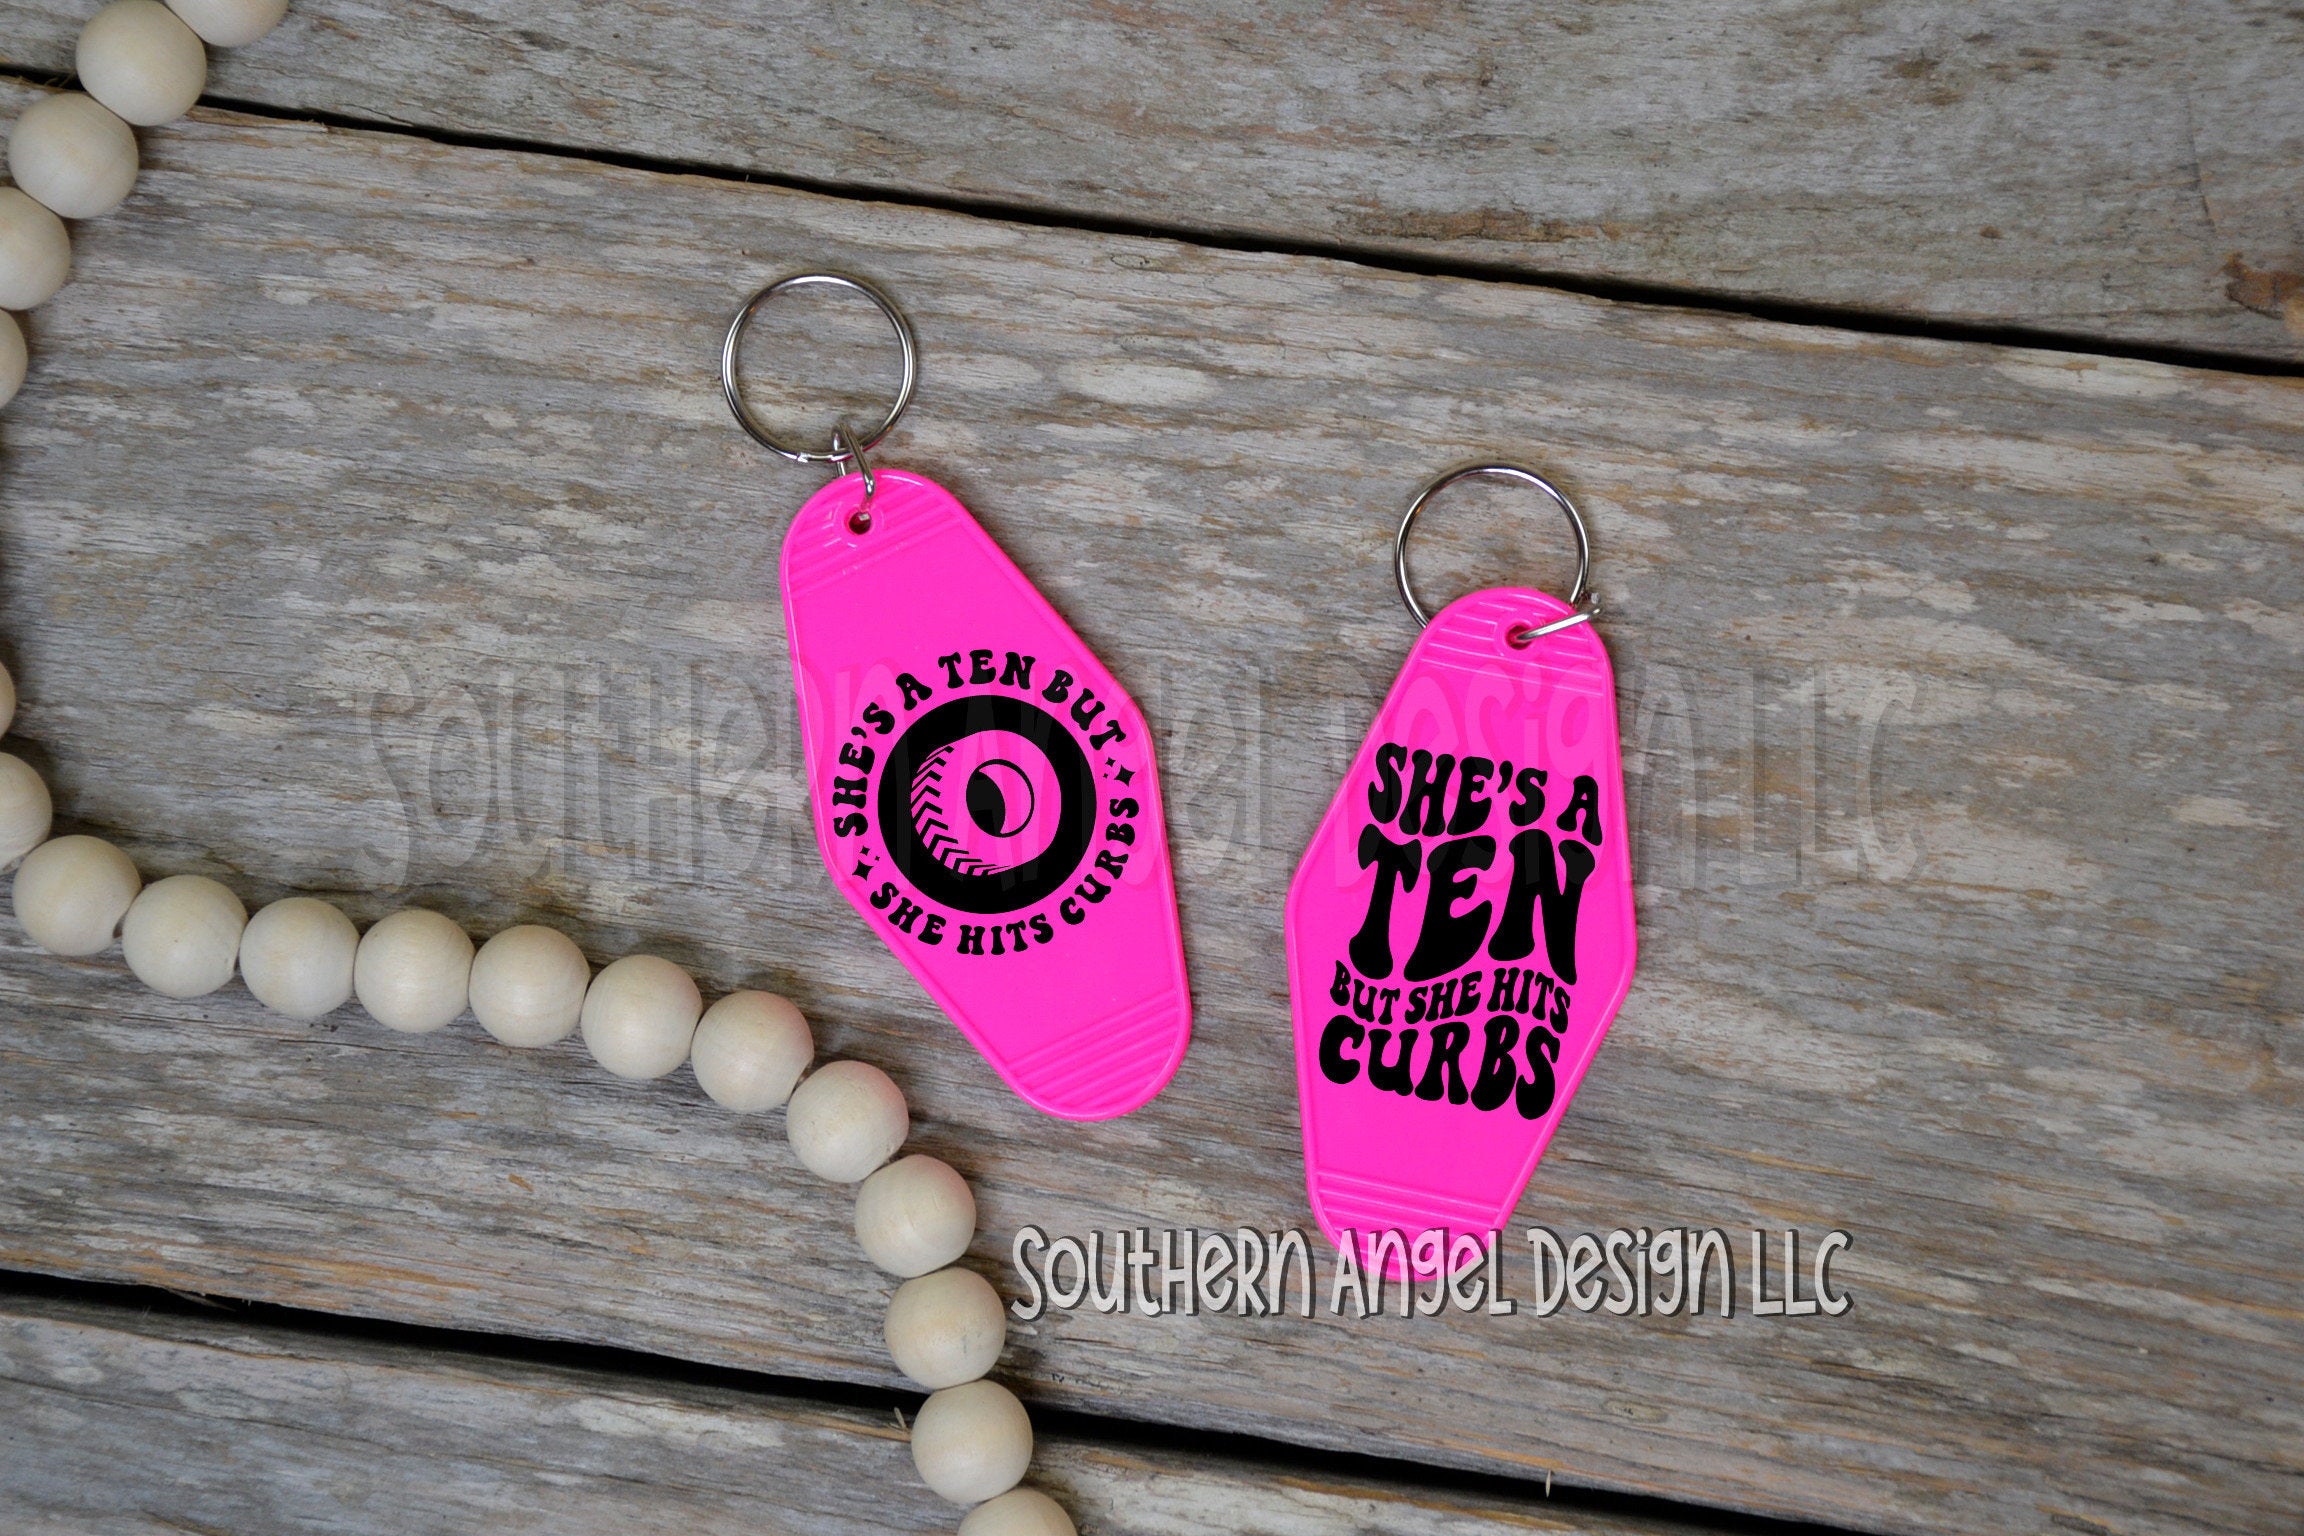 She’s A Ten But She Hits Curbs Vintage Motel Keychain Trendy Key Tag Homemade Funny Gifts for Her Pink Car Accessories